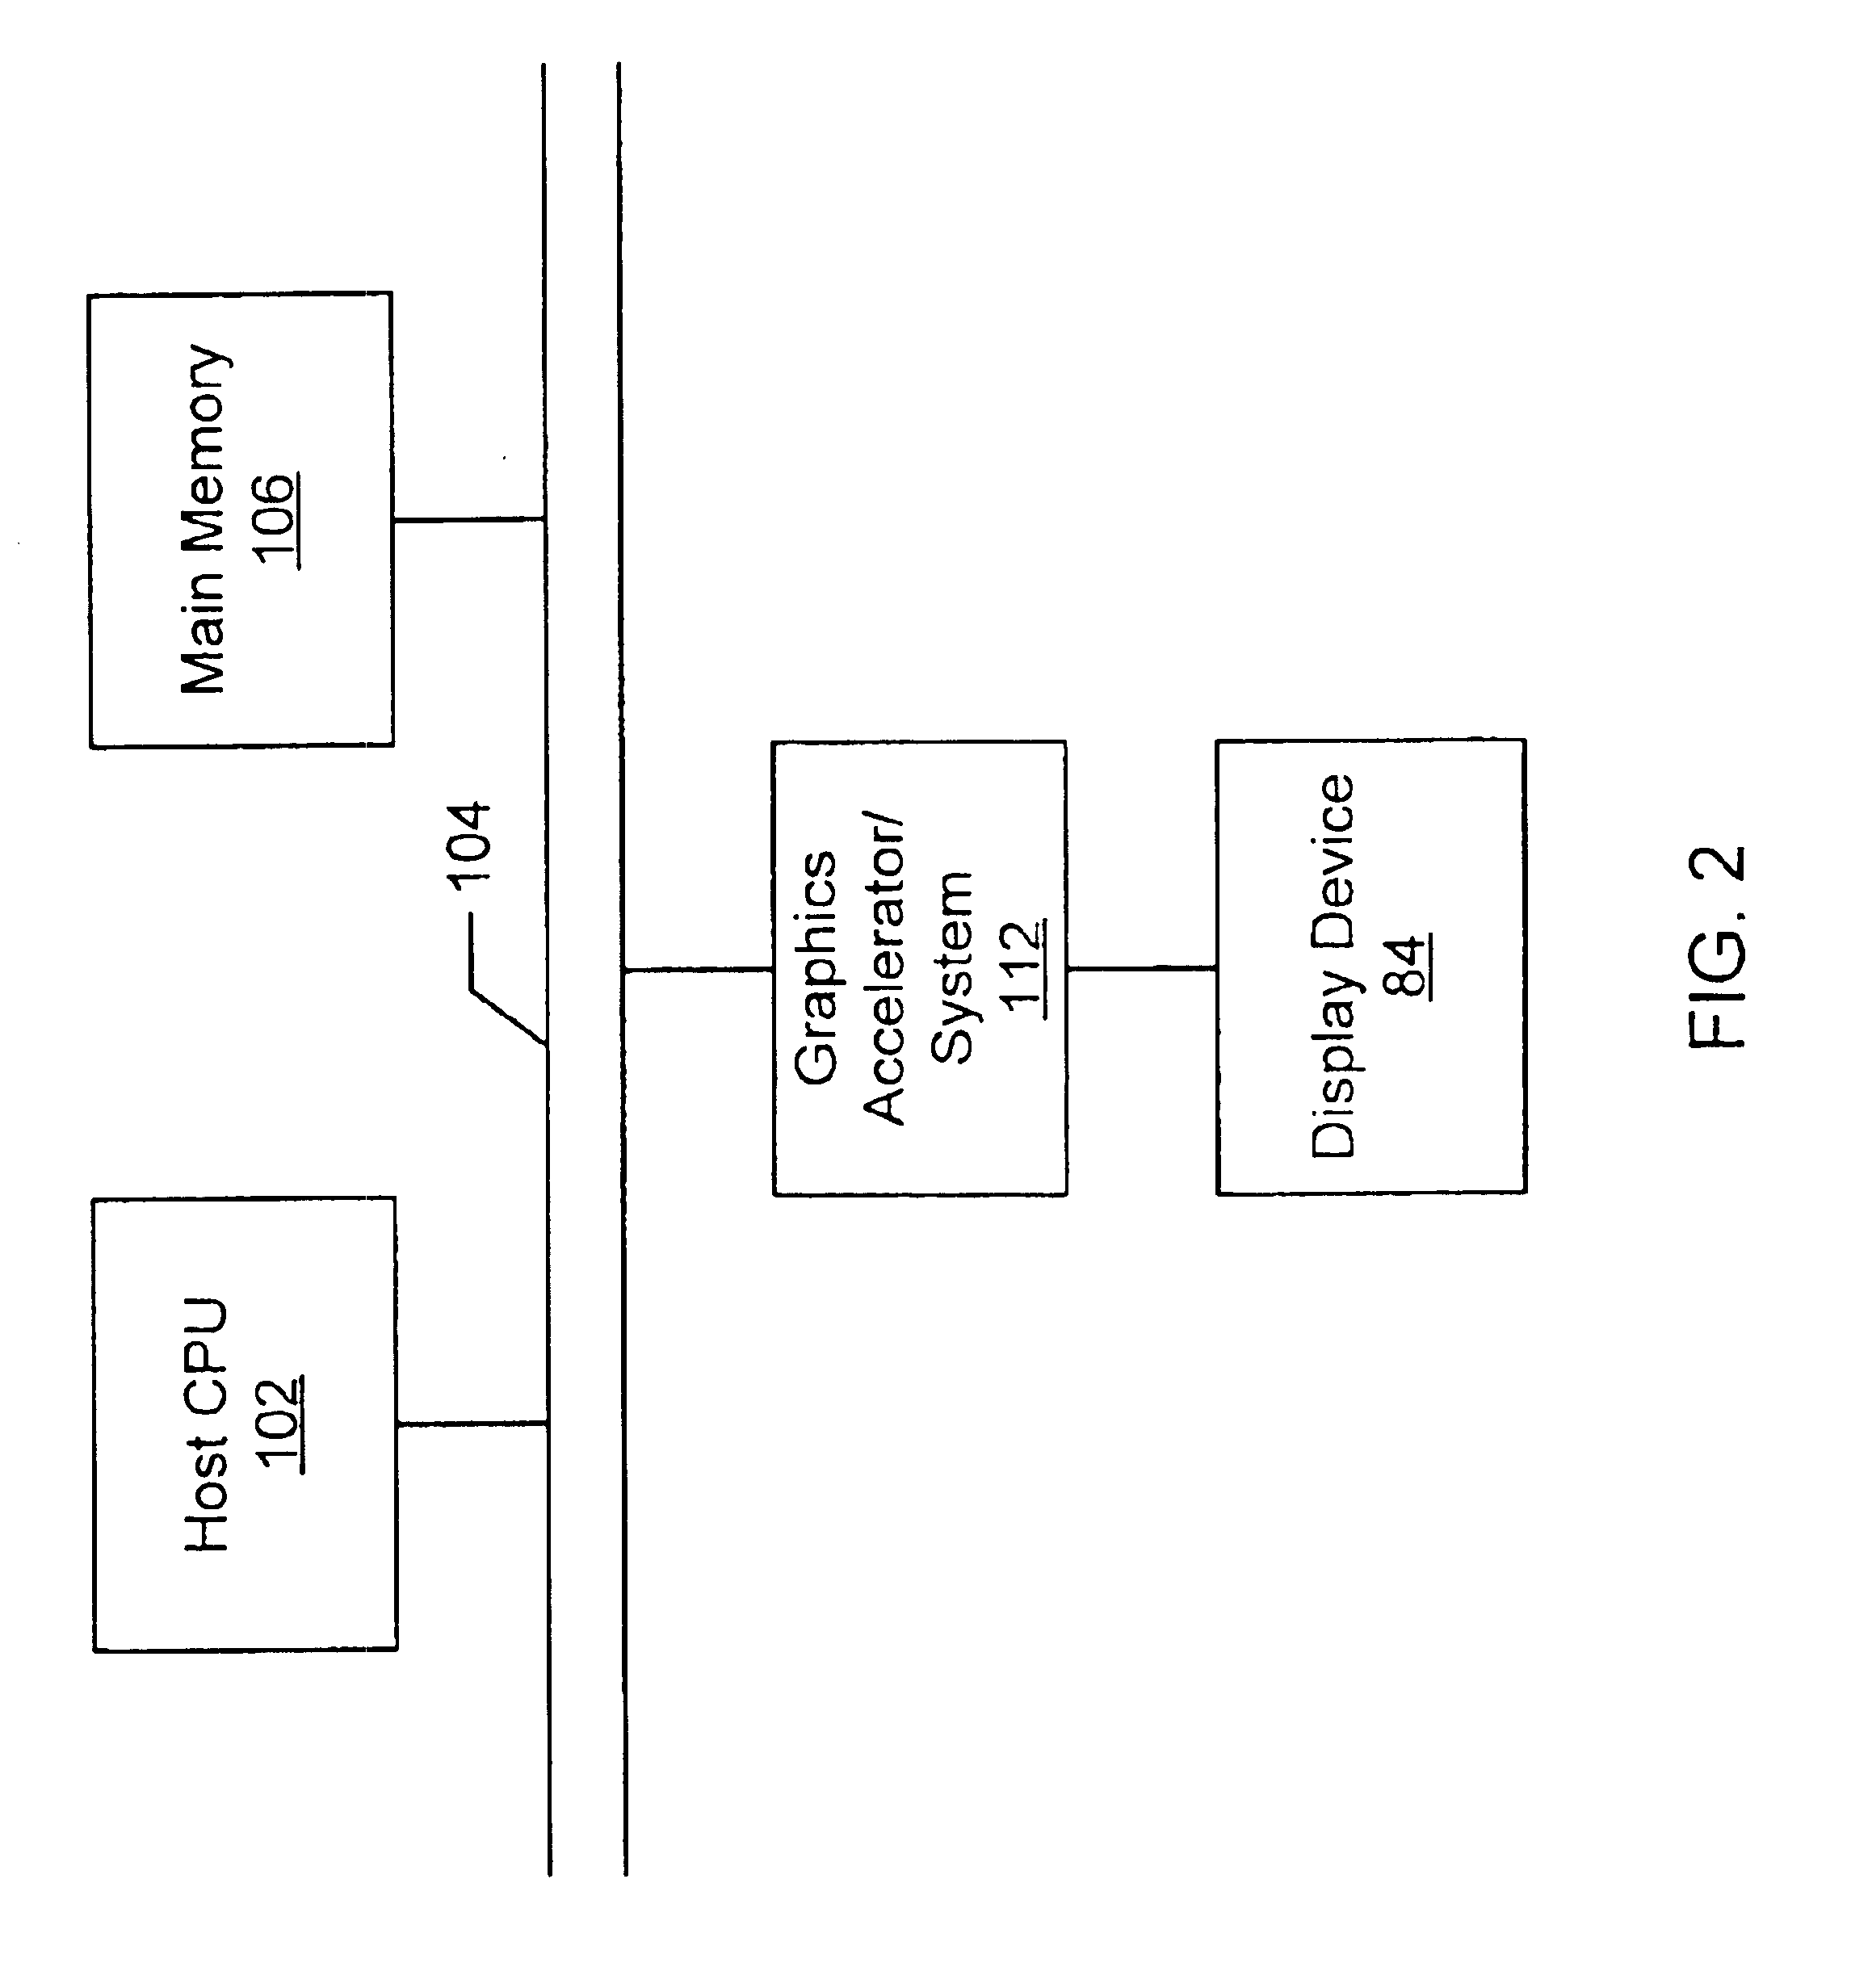 Acceleration of graphics for remote display using redirection of rendering and compression